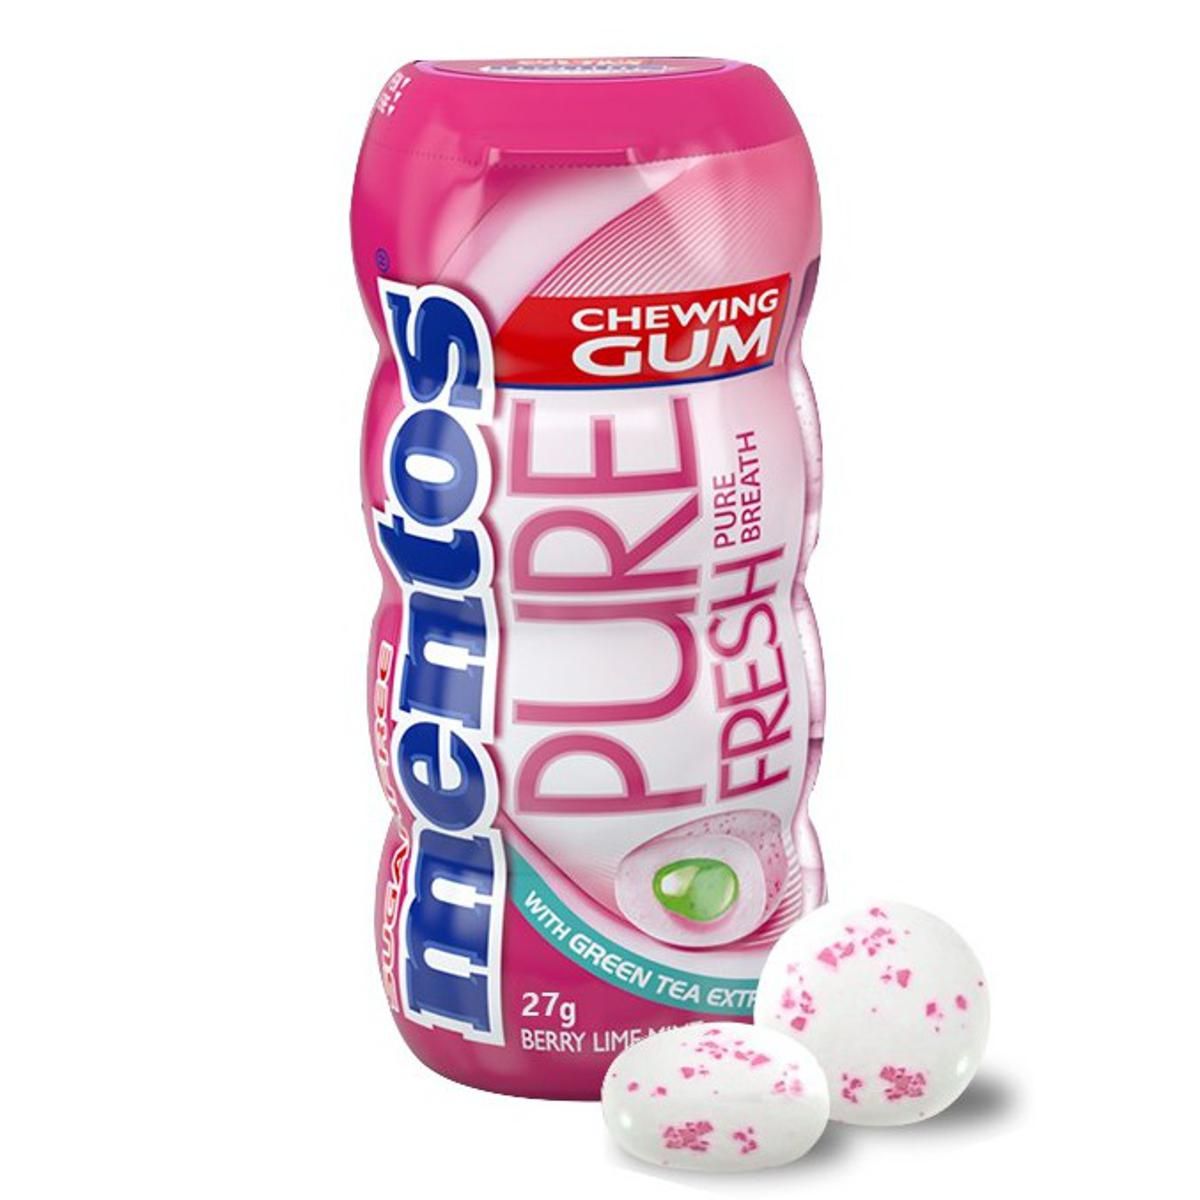 Mentos Pure Fresh Berry Lime Mint Pocket Bottle (Sugar-Free) 29gm Chewing Gum